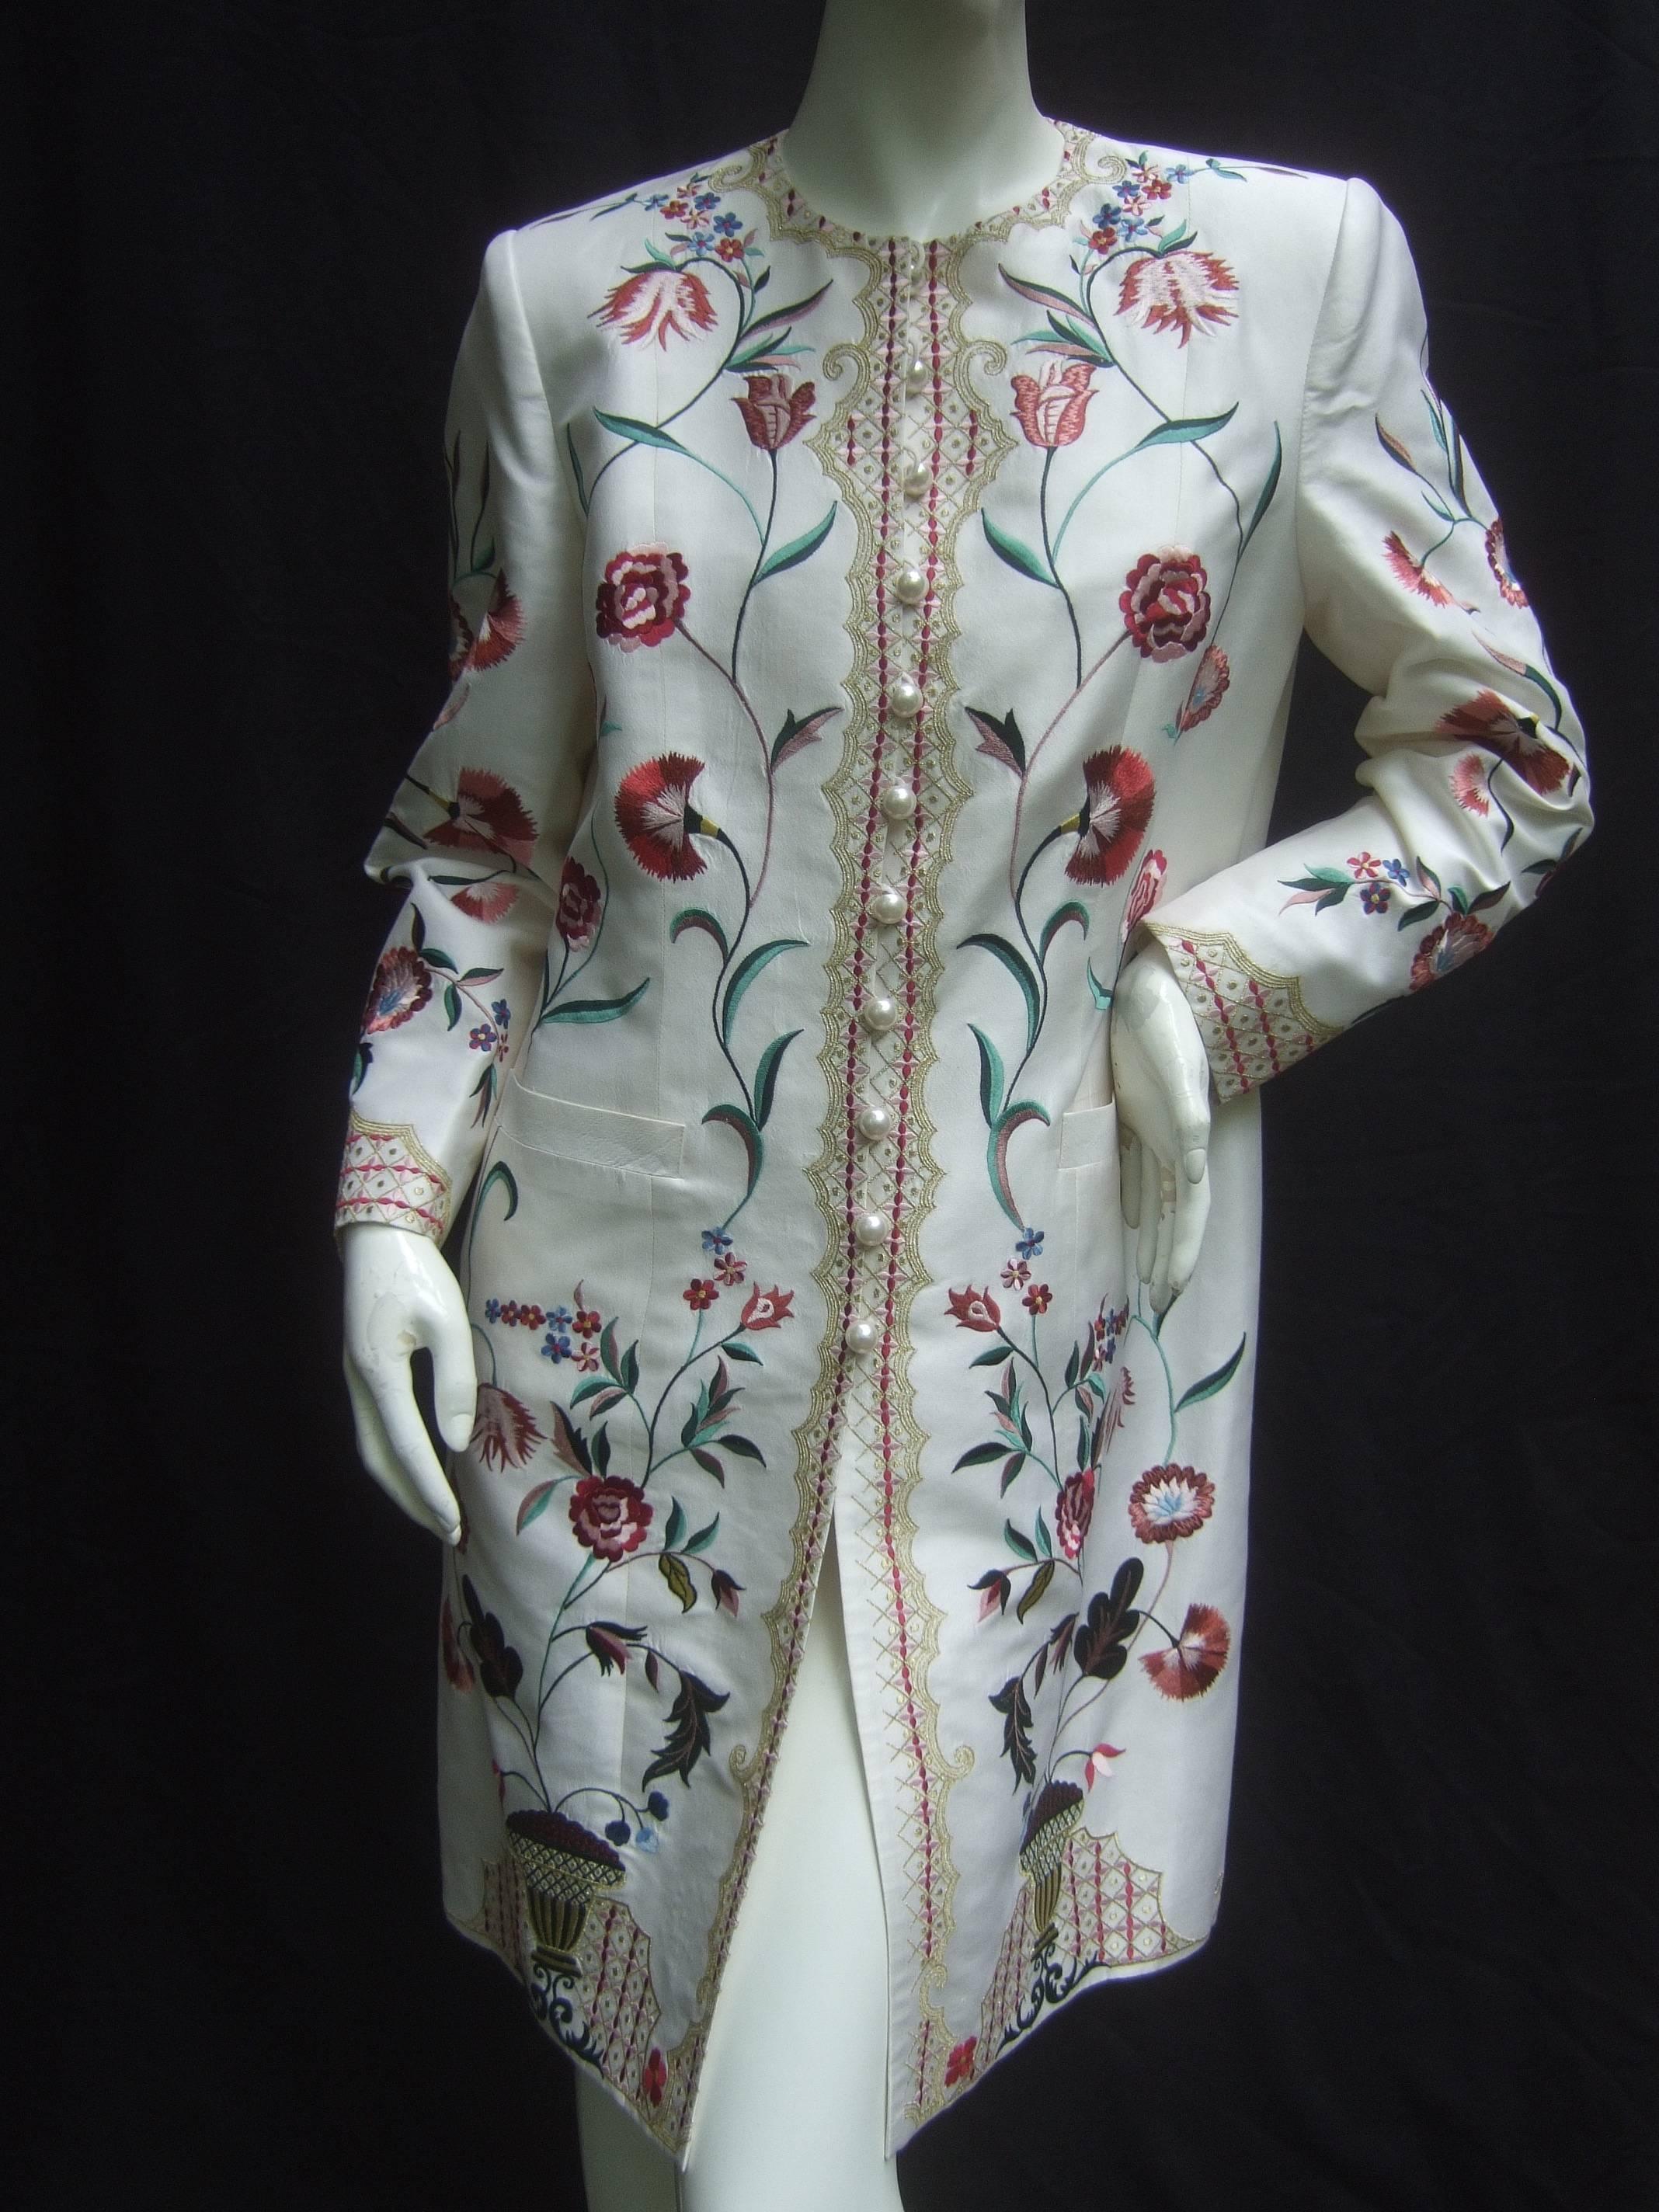 Exotic Haute couture embroidered satin coat by Max Nugus
The opulent coat is embellished with elaborate floral 
embroidery that has an Asian influence 

The duster style spring coat is adorned with resin
enamel pearl buttons that partially run